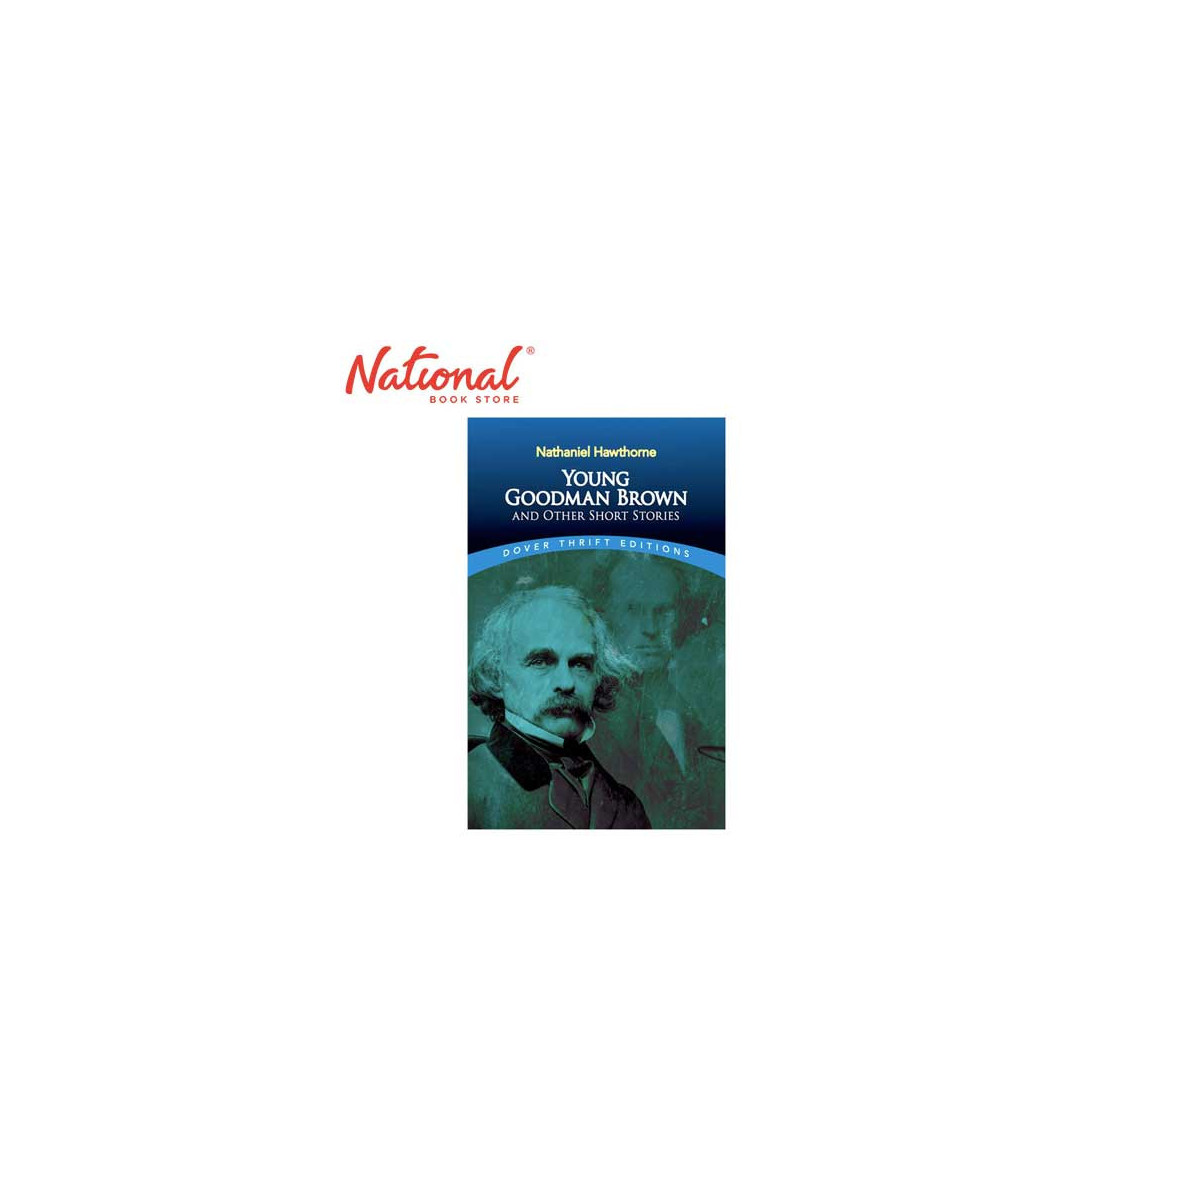 Young Goodman Brown And Other Short Stories by Nathaniel Hawthorne - Trade Paperback - Classics